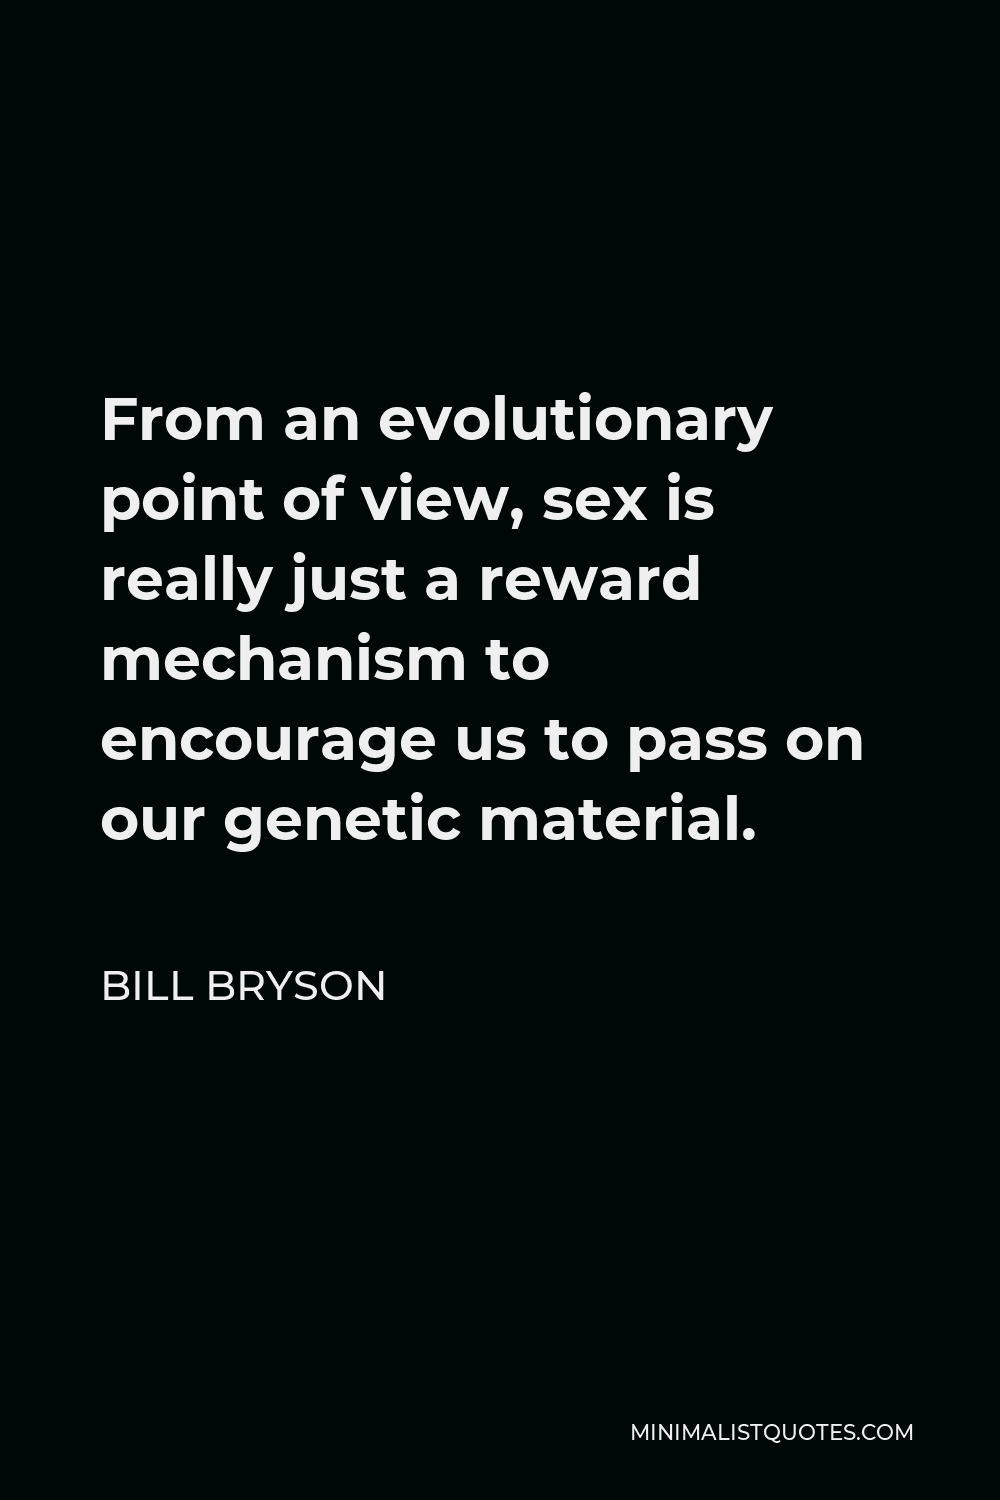 Bill Bryson Quote - From an evolutionary point of view, sex is really just a reward mechanism to encourage us to pass on our genetic material.